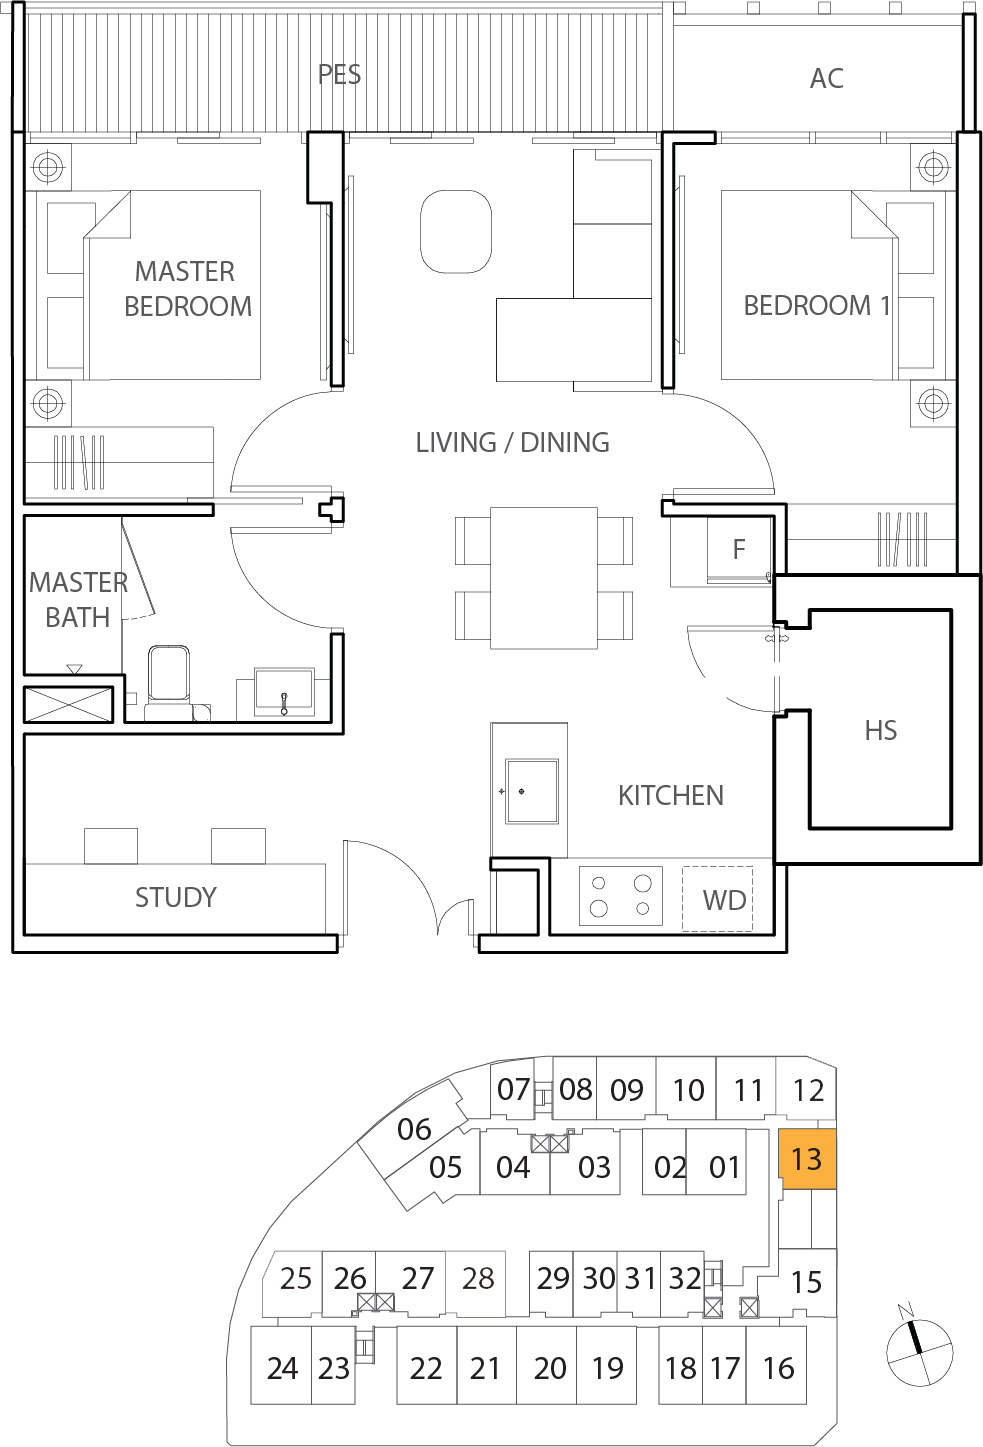 Floor Plan for Residential Type eB2-a1